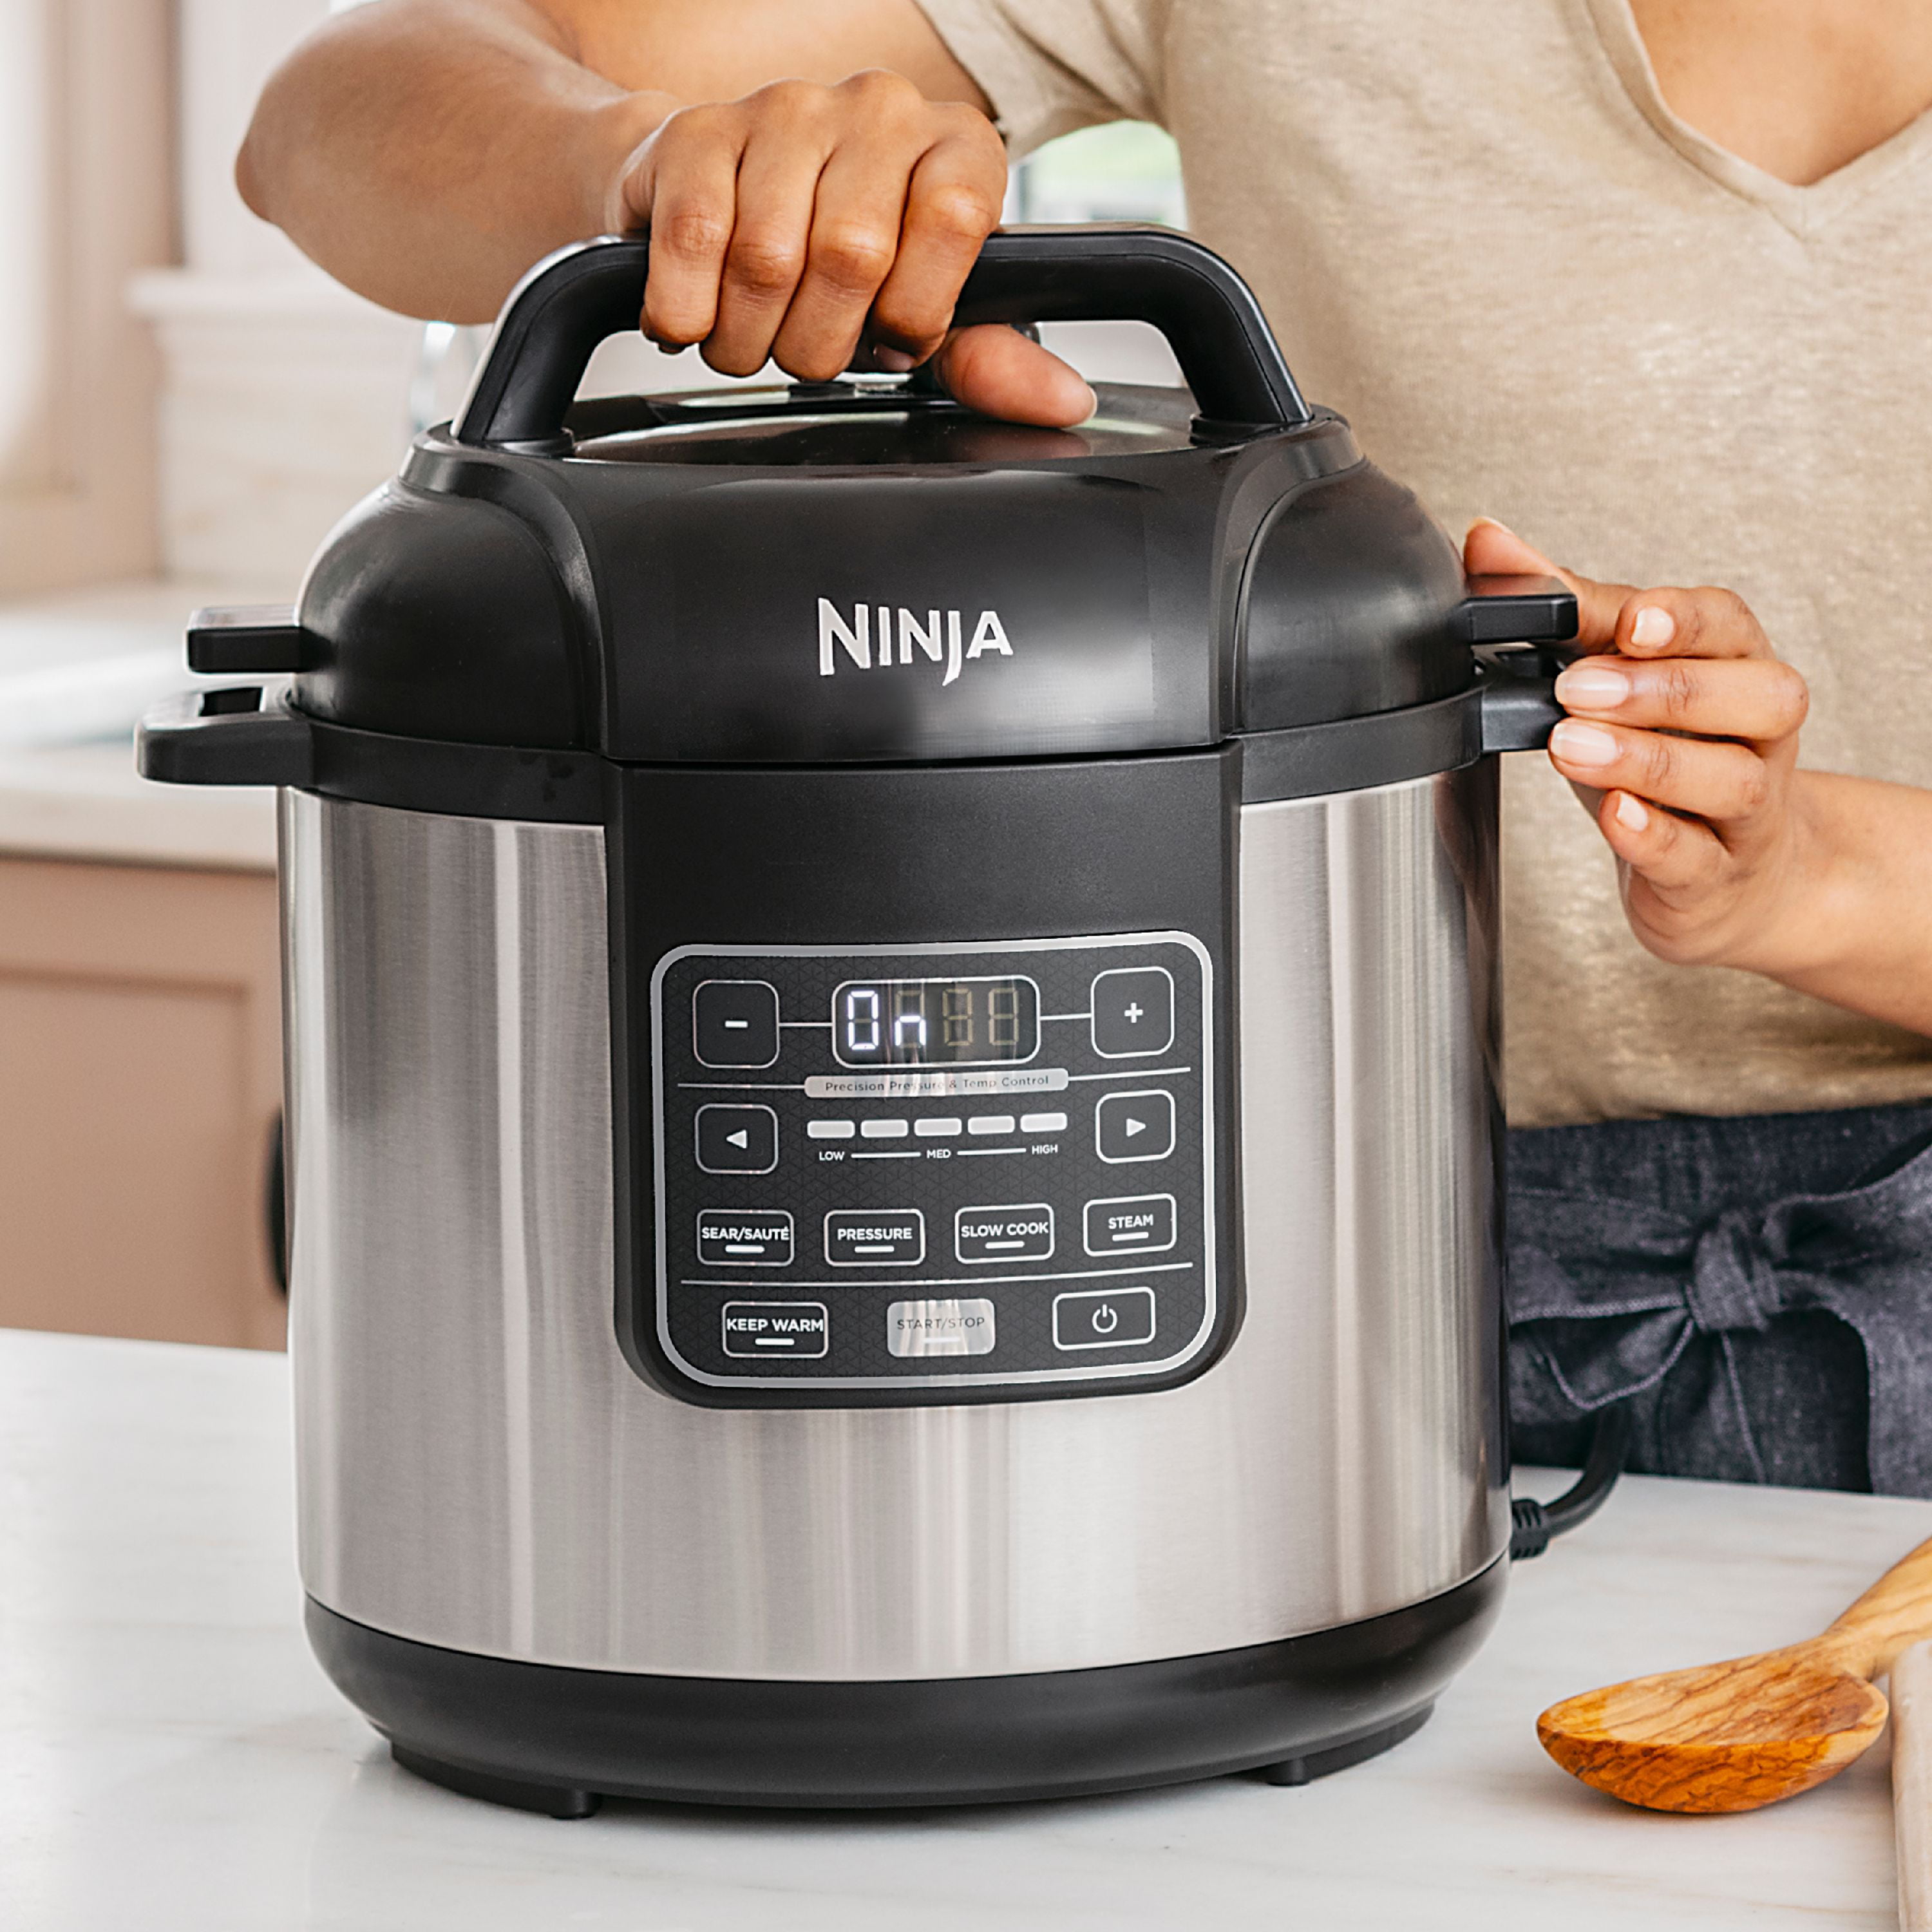 Usually $280, this Ninja pressure cooker is $100 today